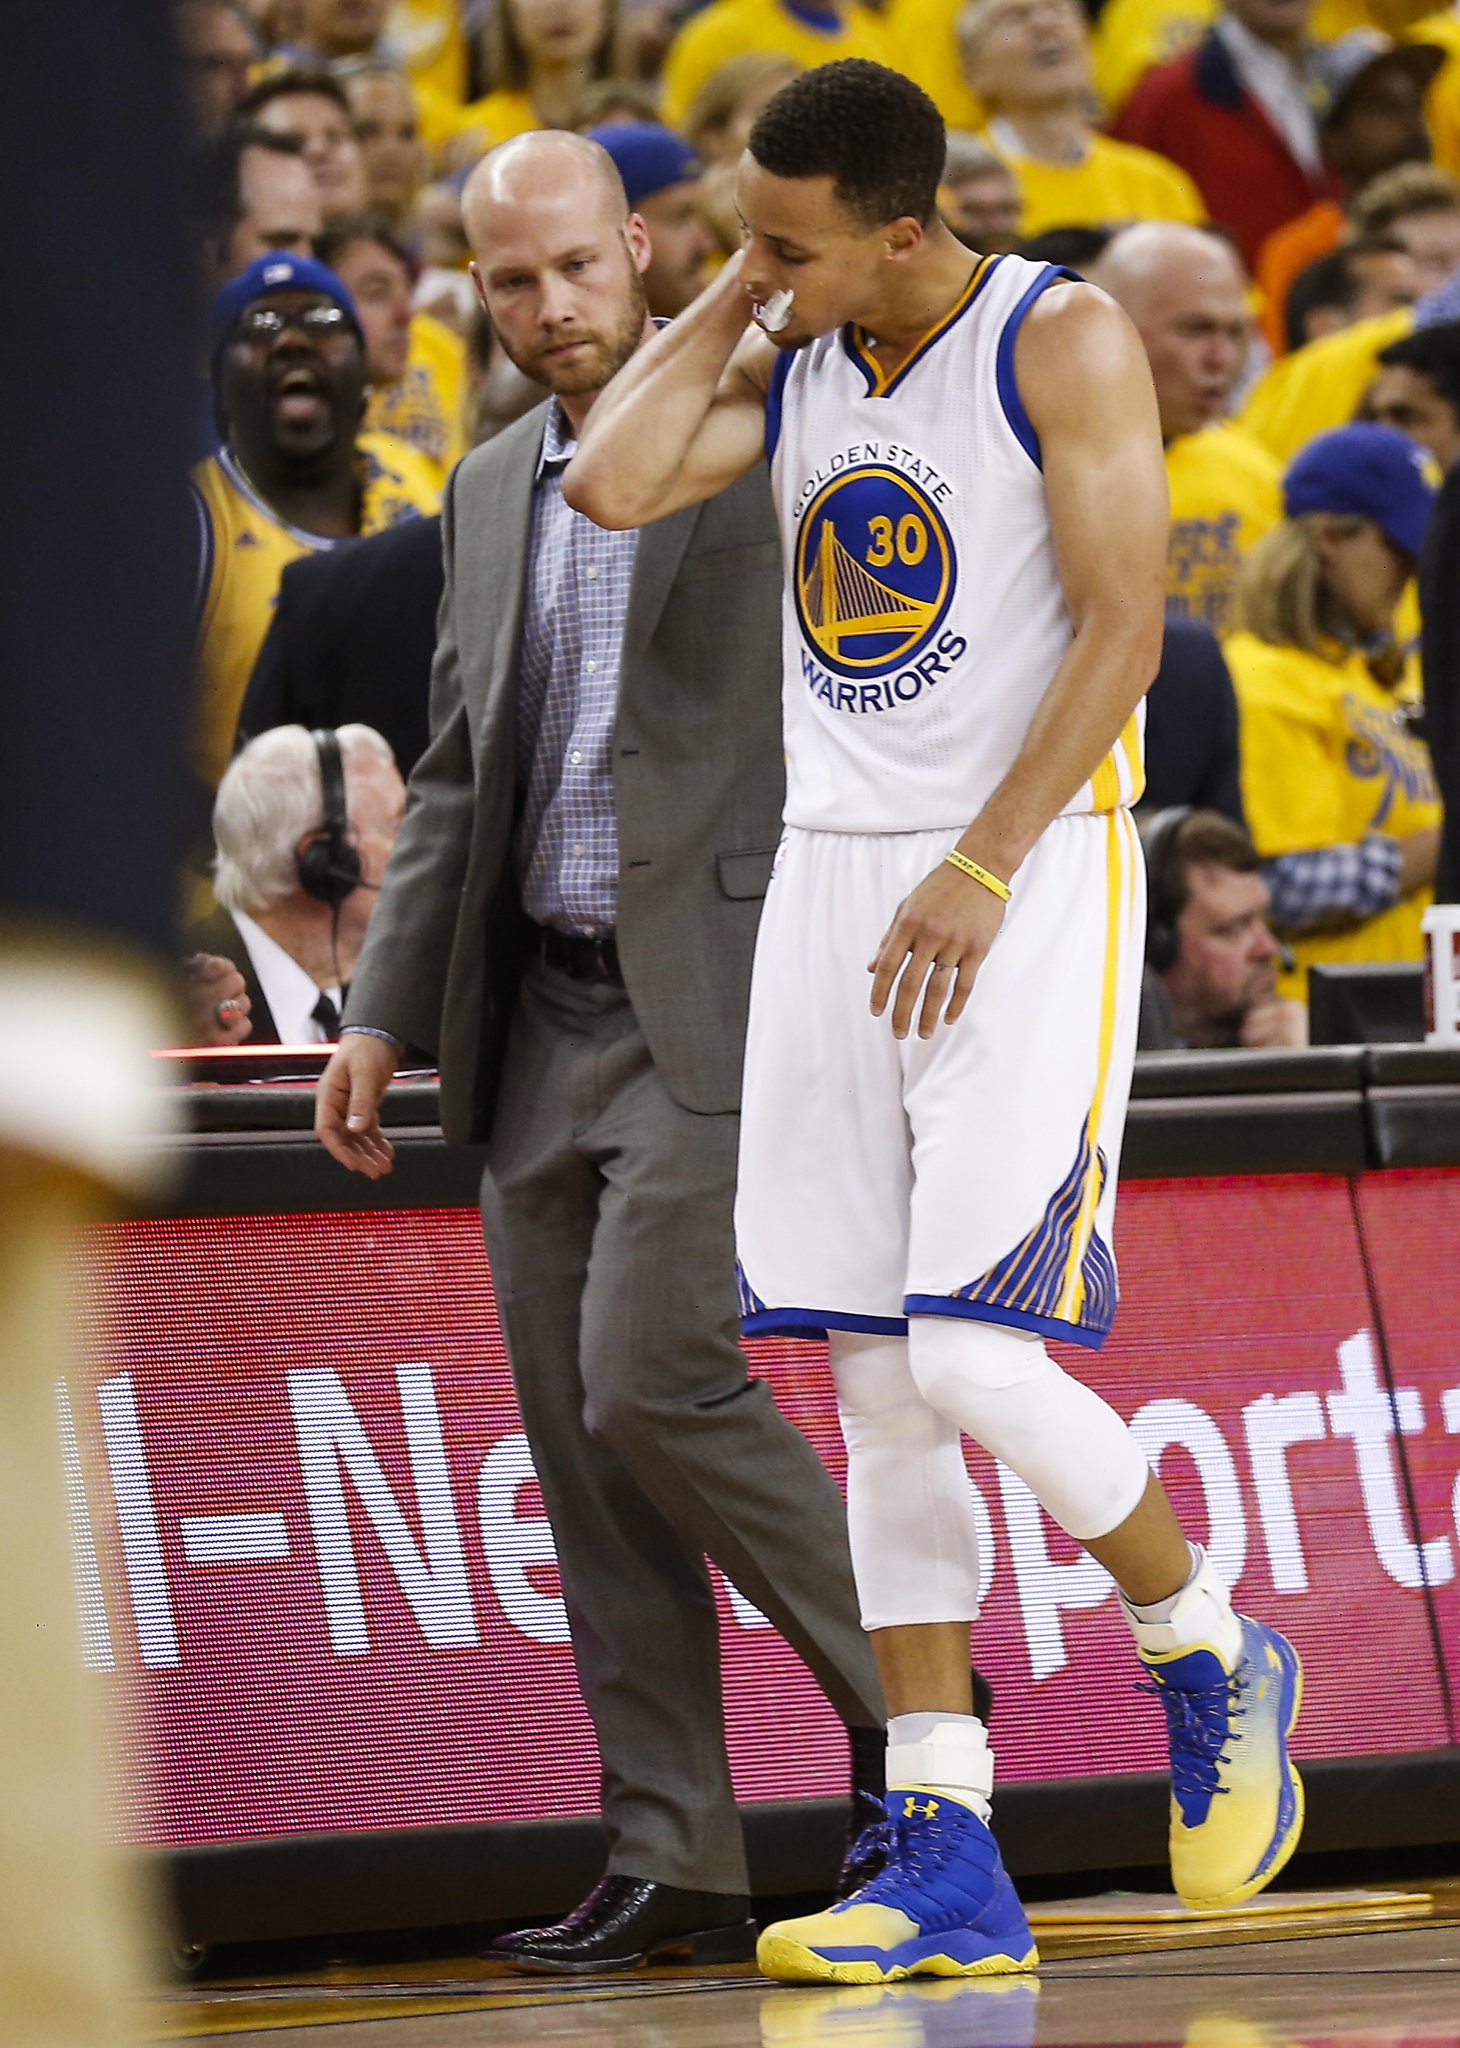 Nick in the AM: Warriors' Shaun Livingston ties the knot